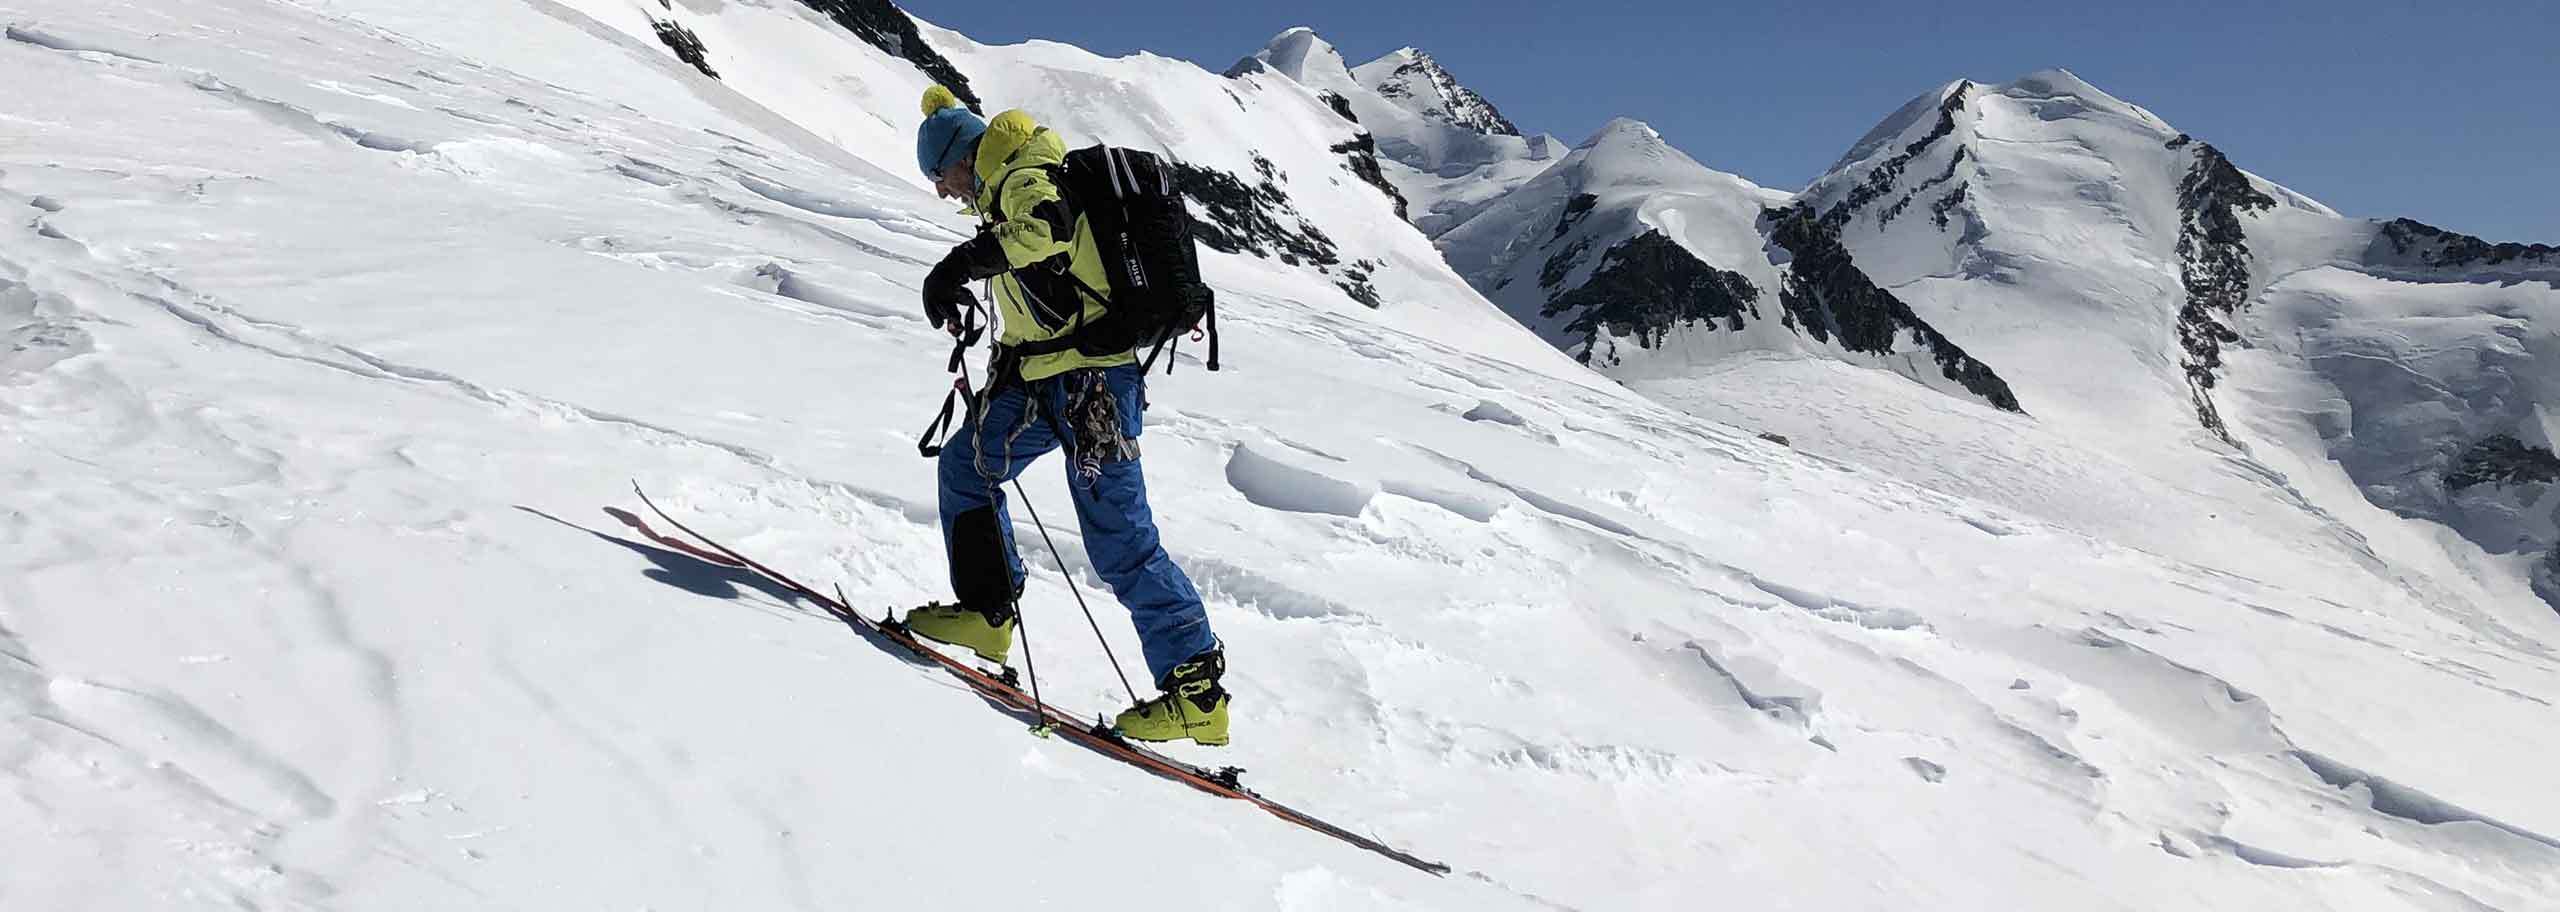 Ski Mountaineering with Mountain Guide in Champoluc, Monte Rosa